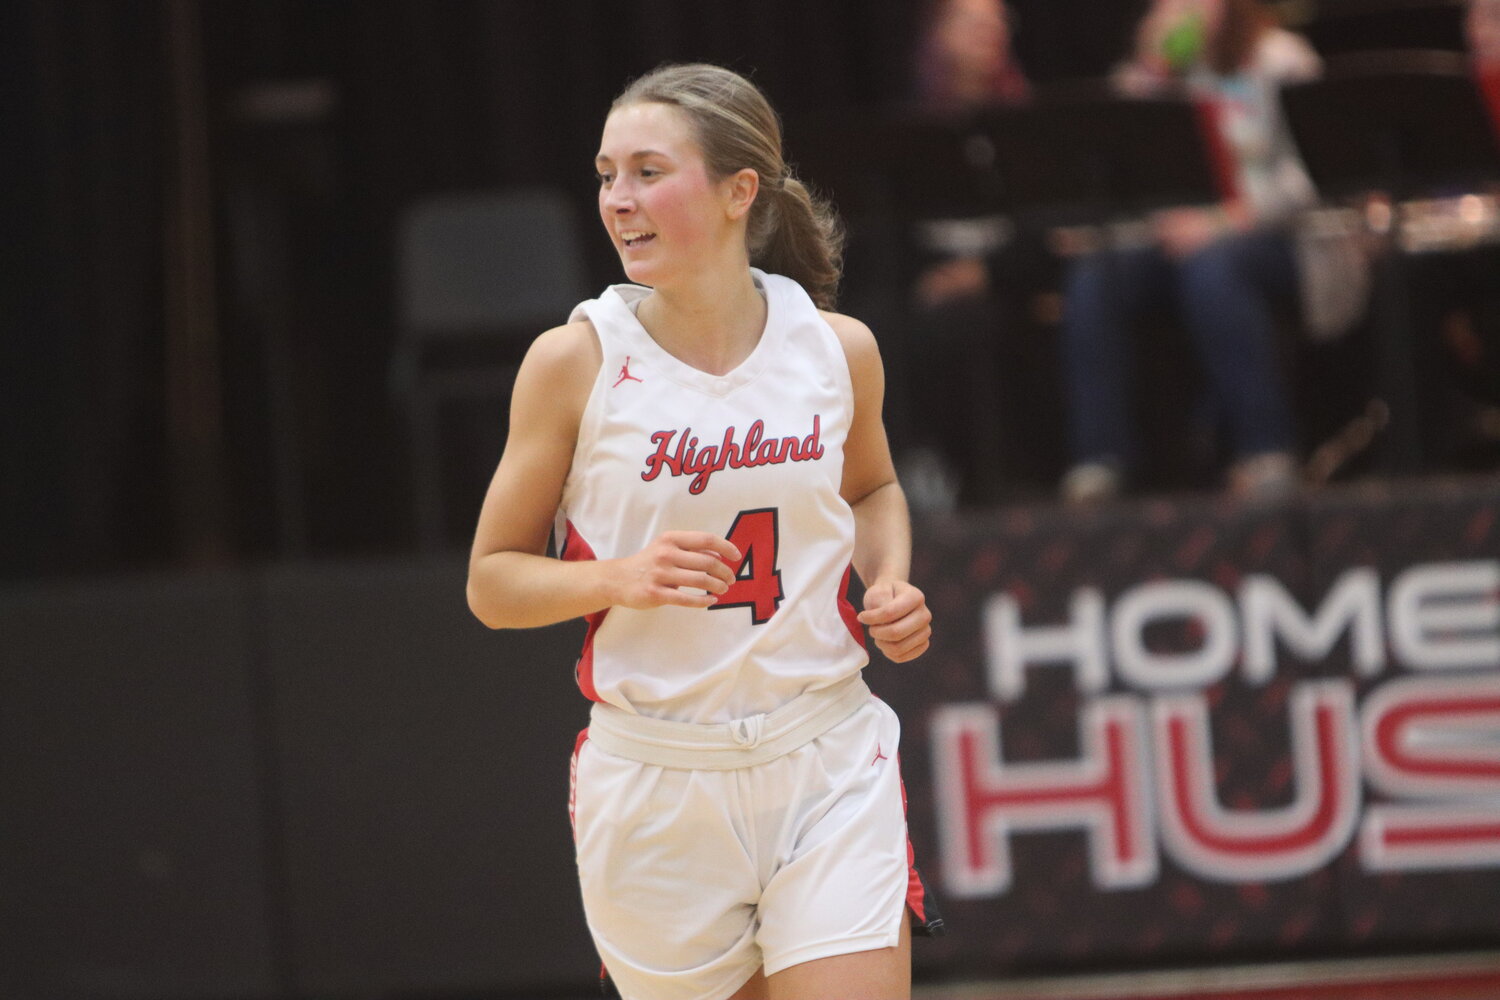 Highland's Sarah Burton leads the Huskies with 323 points through 20 games.